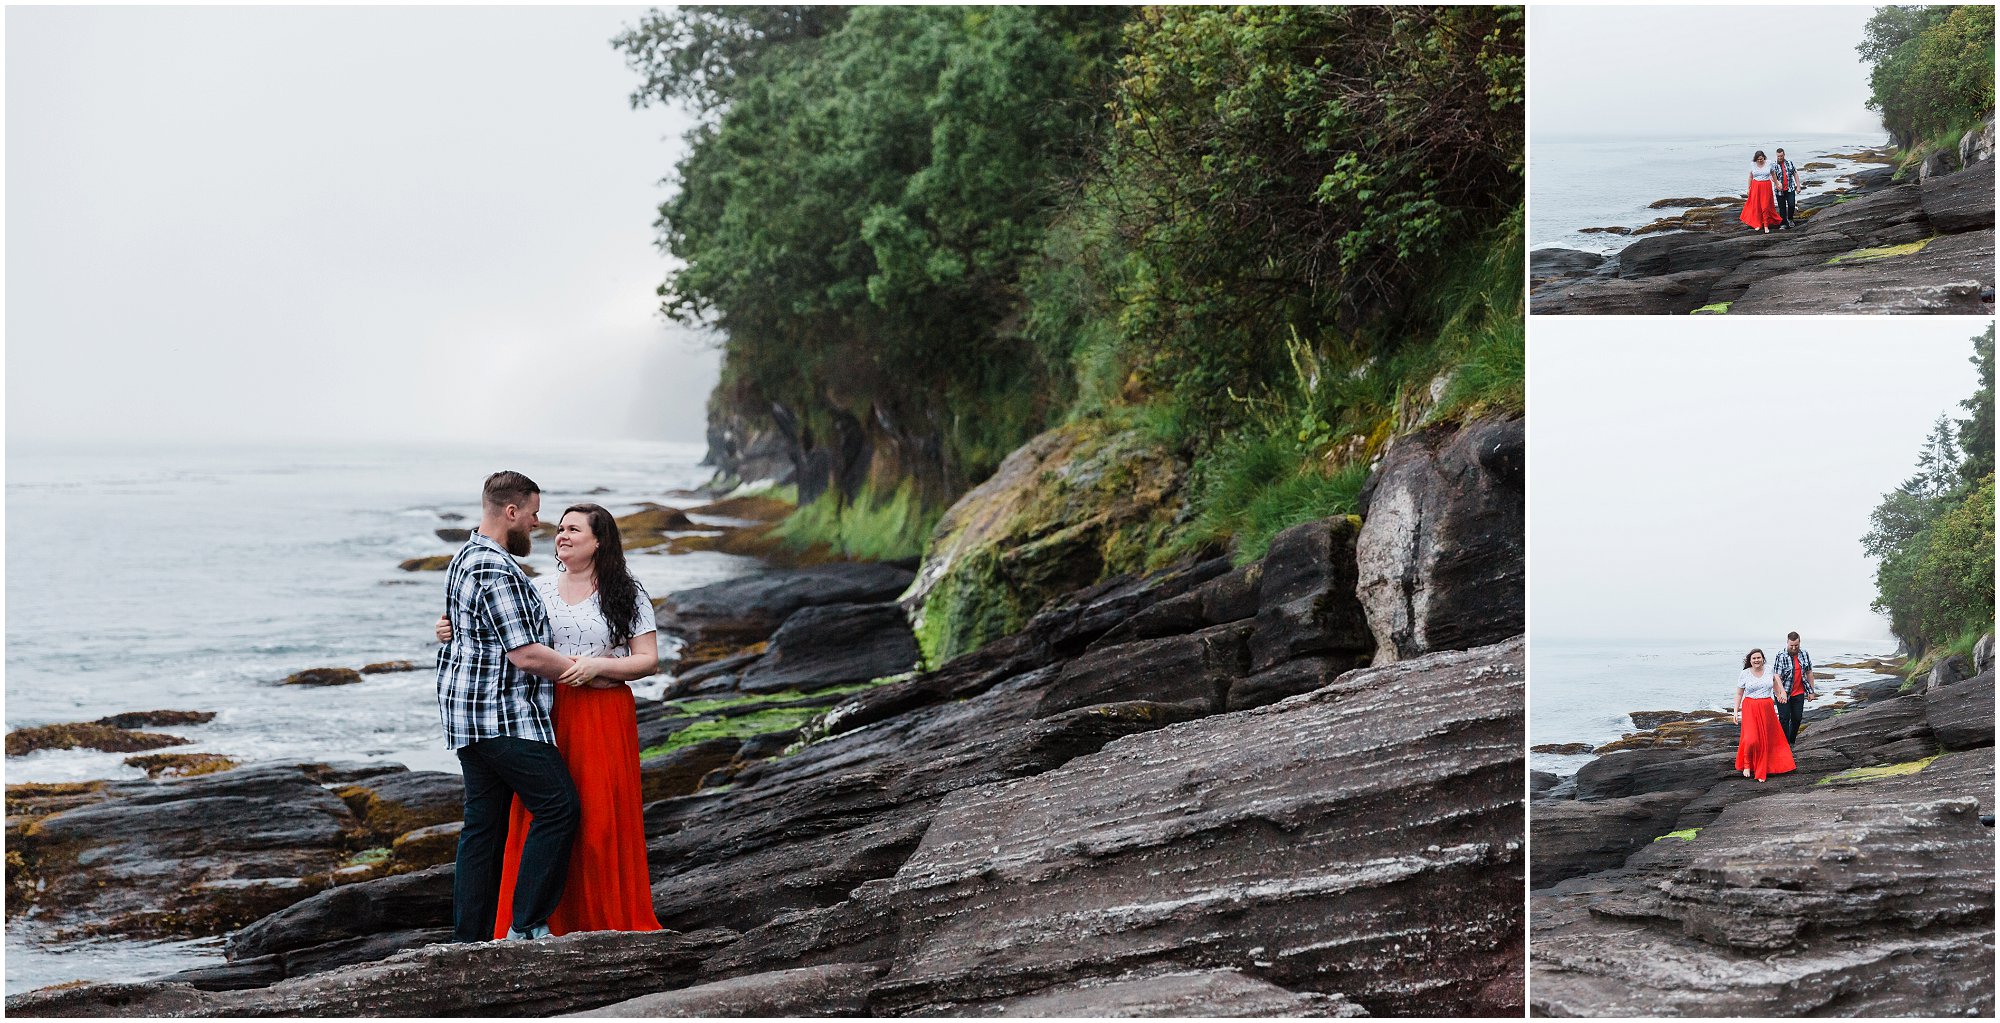 The greenery and rocky cliffs are a gorgeous backdrop for this Washington Coast engagement photo session. | Erica Swantek Photography